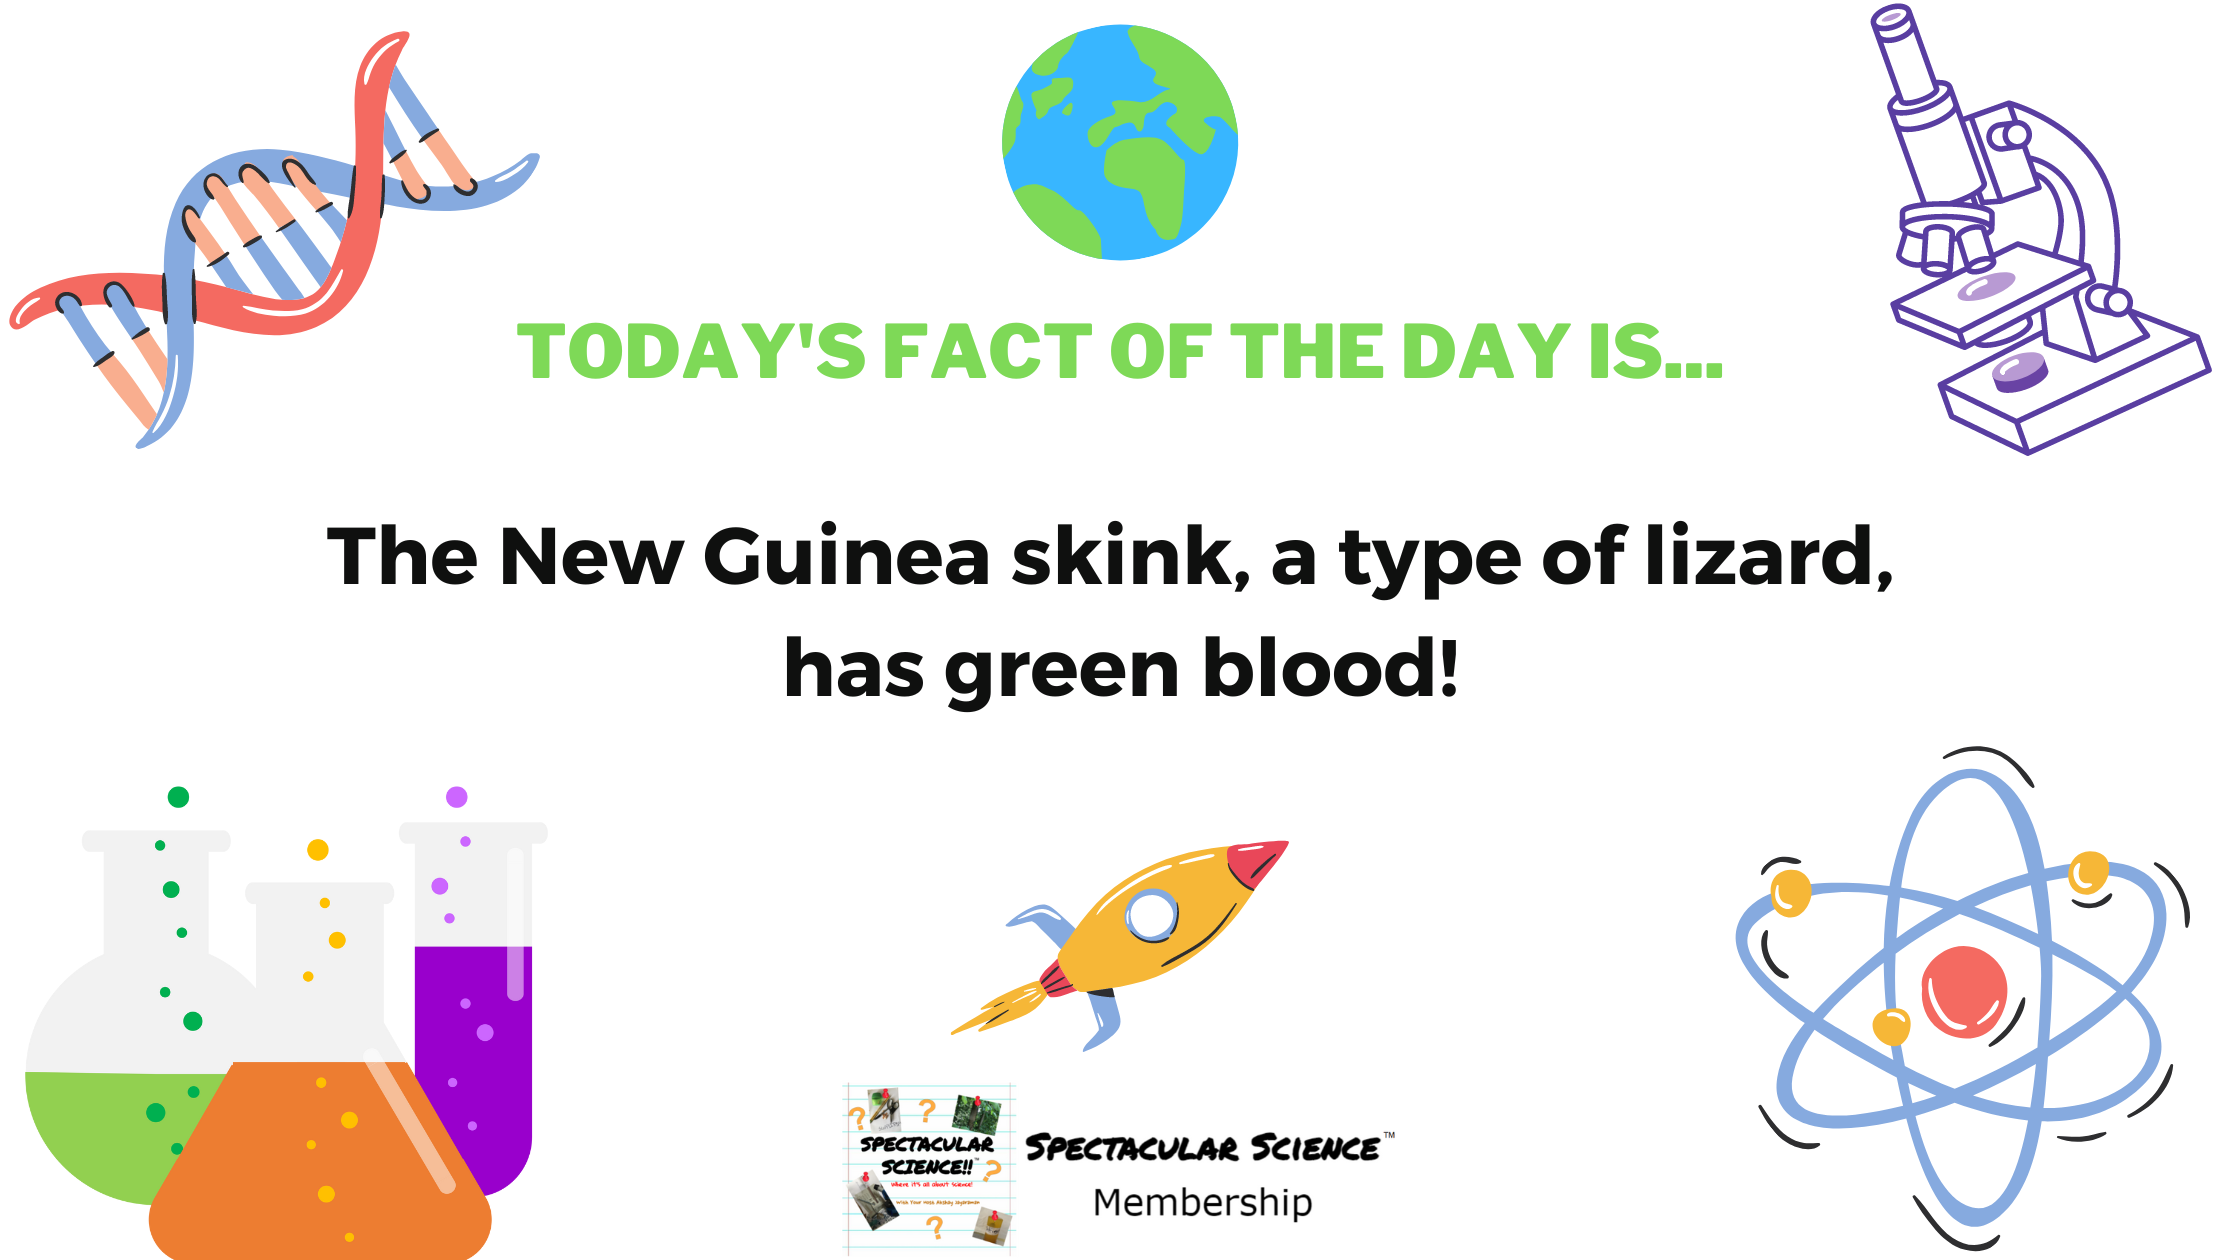 Fact of the Day Image October 19th